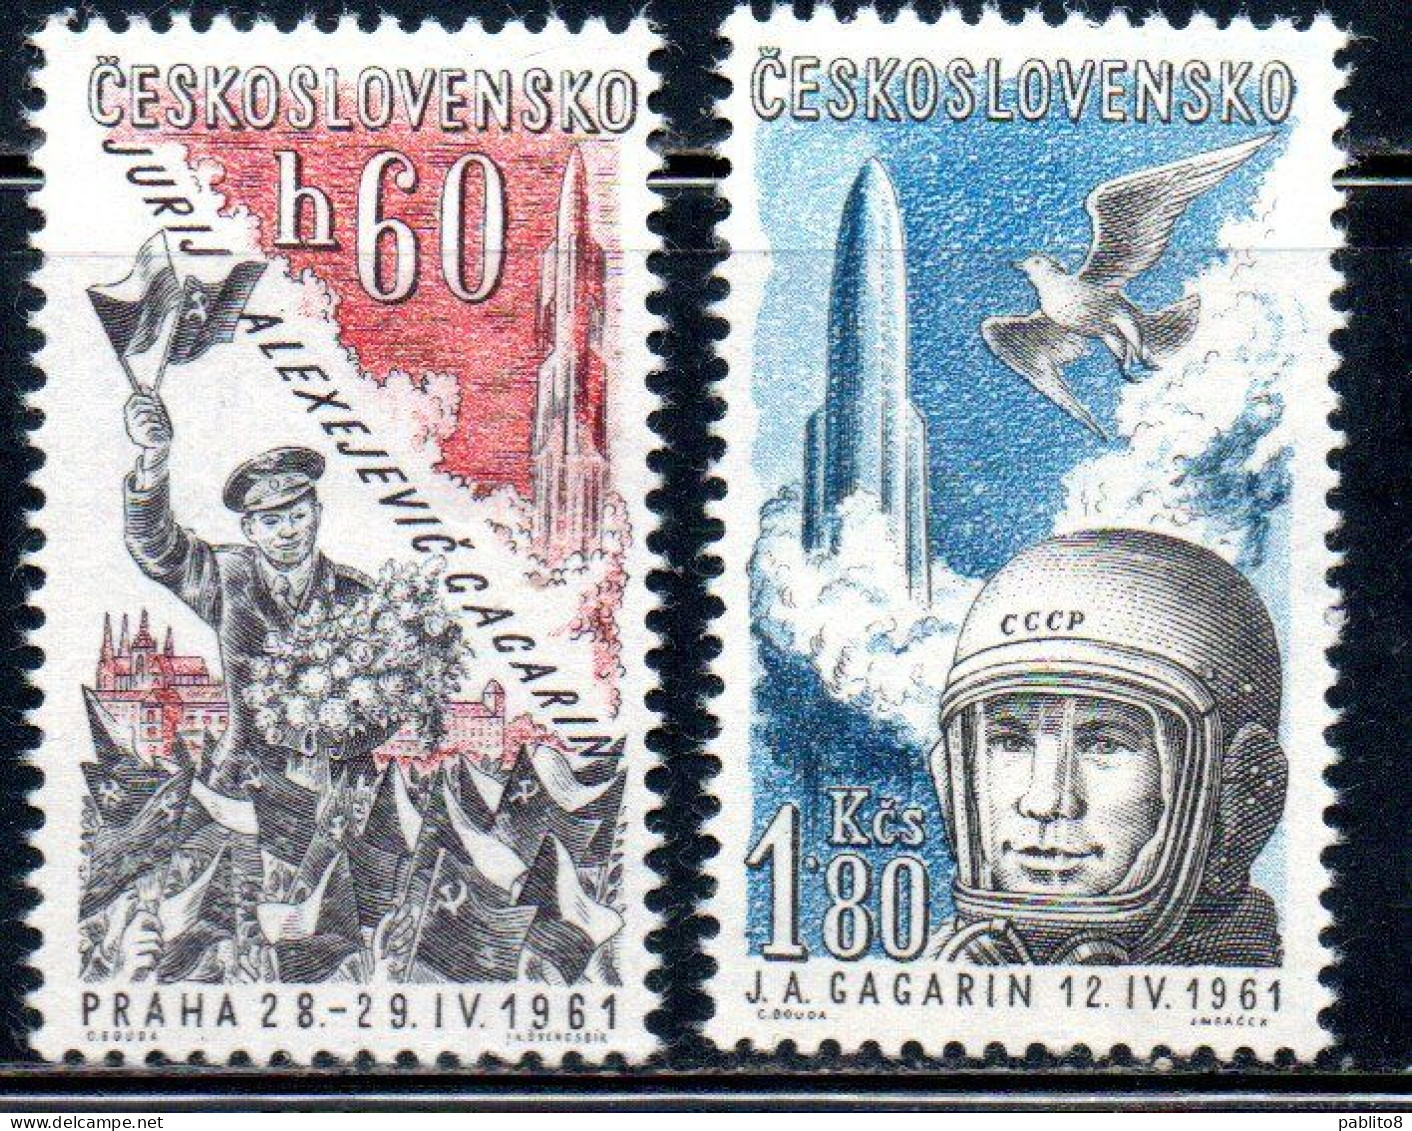 CZECHOSLOVAKIA CECOSLOVACCHIA 1961 AIR POST MAIL AIRMAIL COMMEMORATES MAY GAGARIN' VISIT COMPLETE SET SERIE COMPLETA MNH - Luftpost